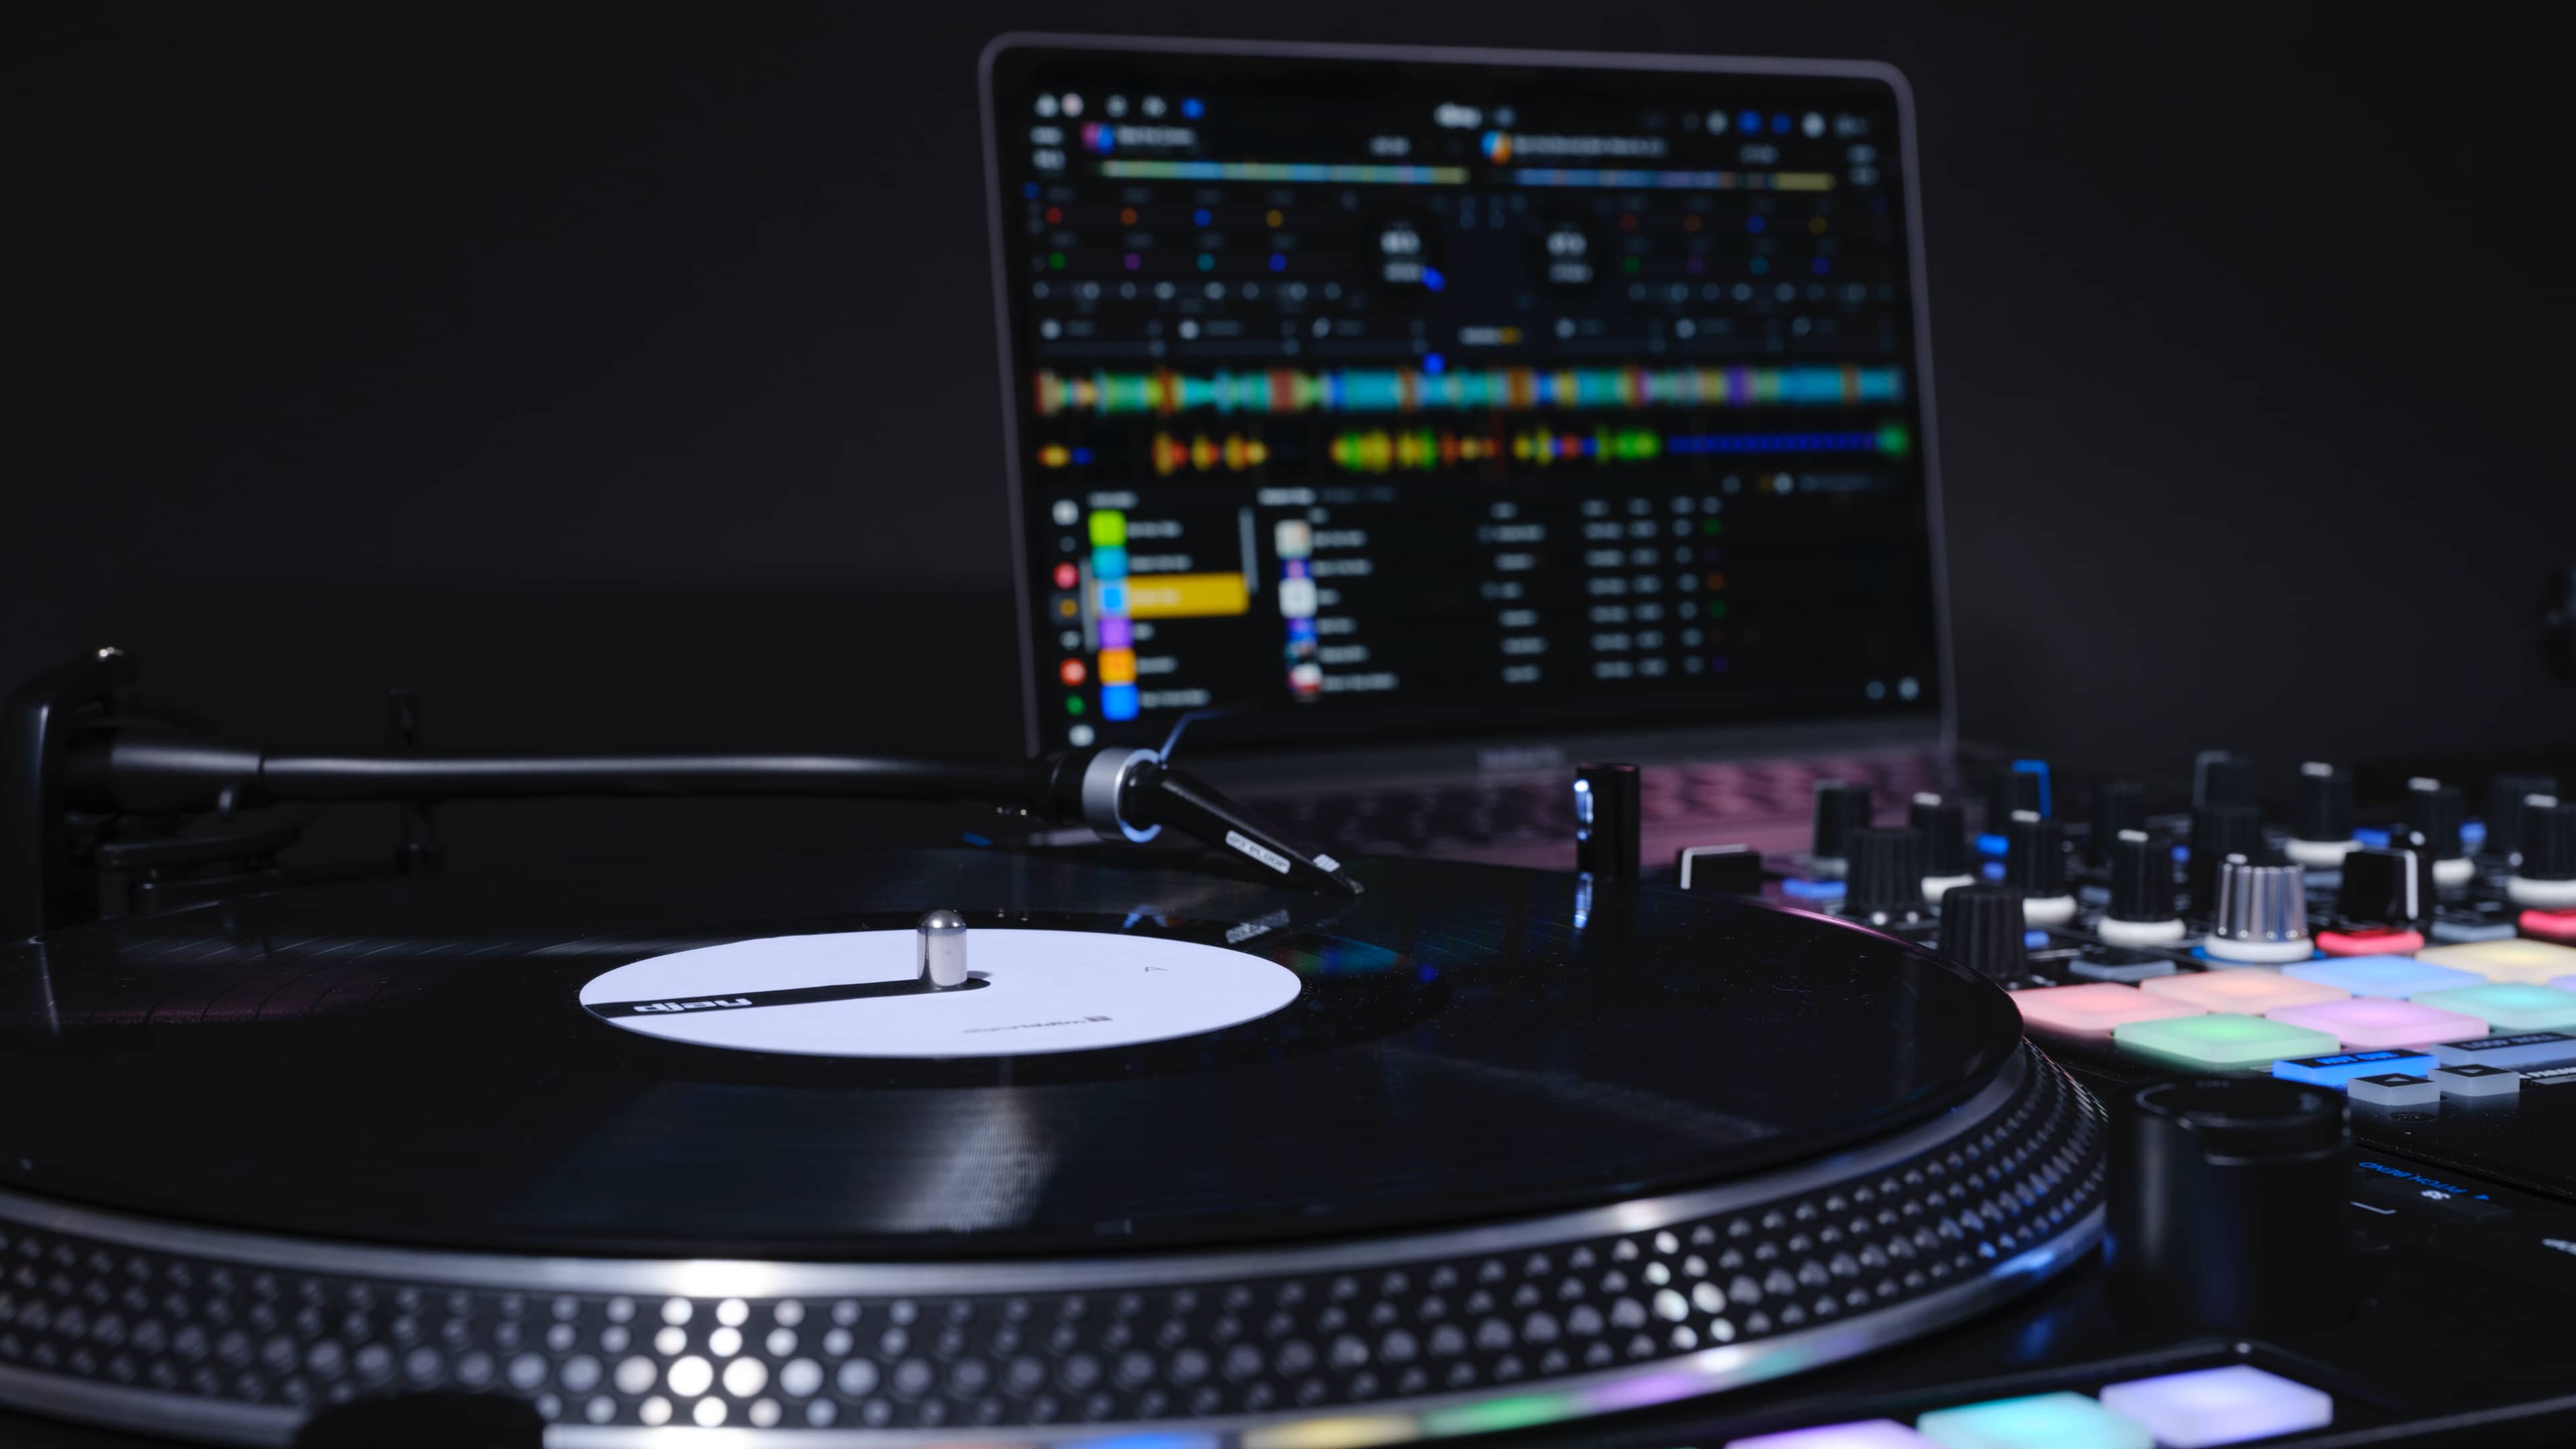 Promotional image showcasing the digital vinyl system in Algoriddim's djay Pro and using a connected professional analog turntable to control the app